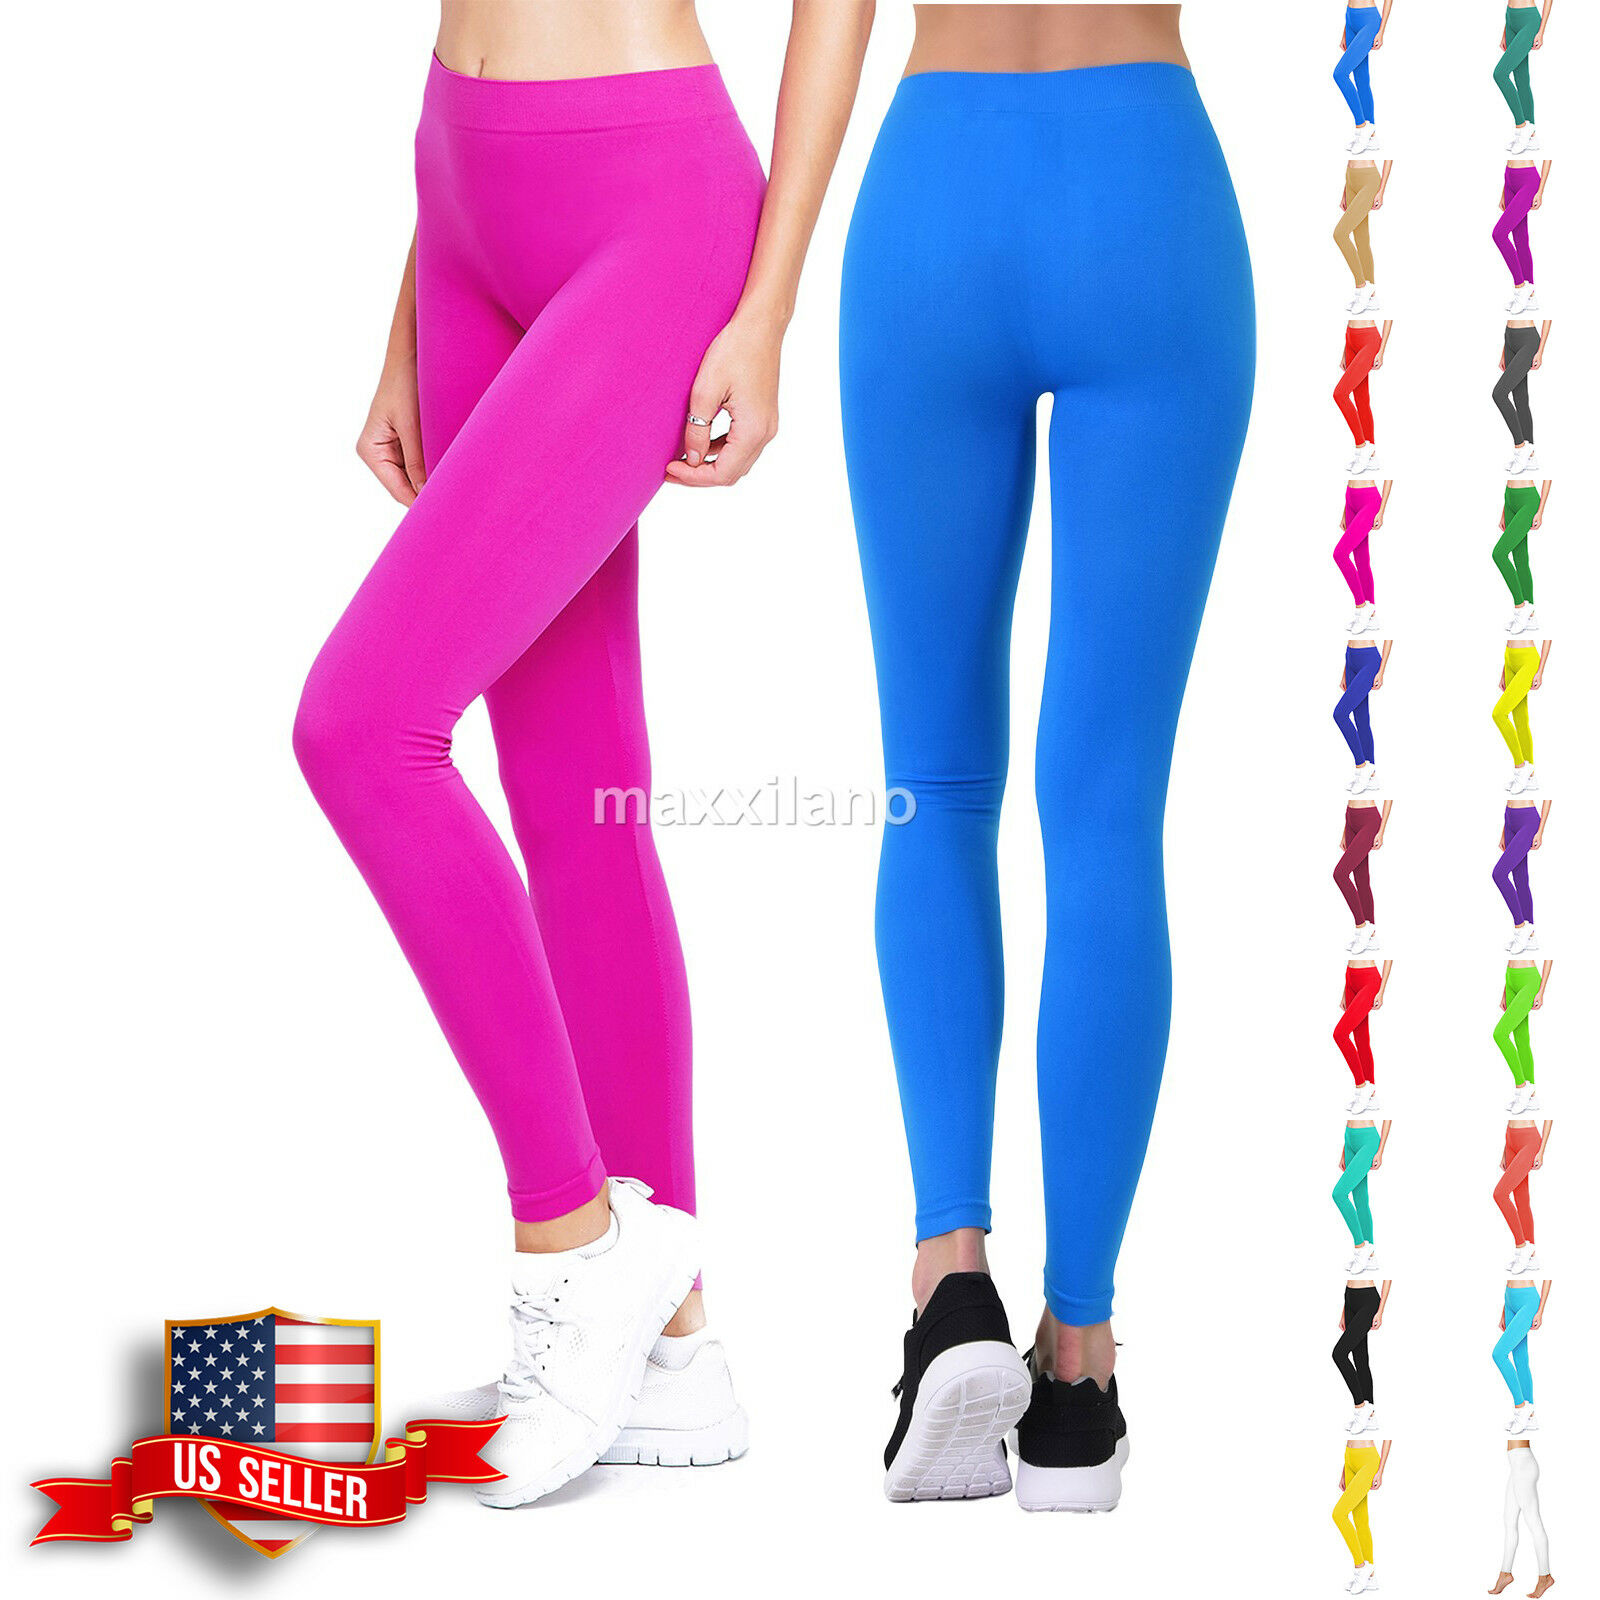 Womens Leggings Footless Pants Yoga Skinny Fitness Solid Basic Stretch Athletic